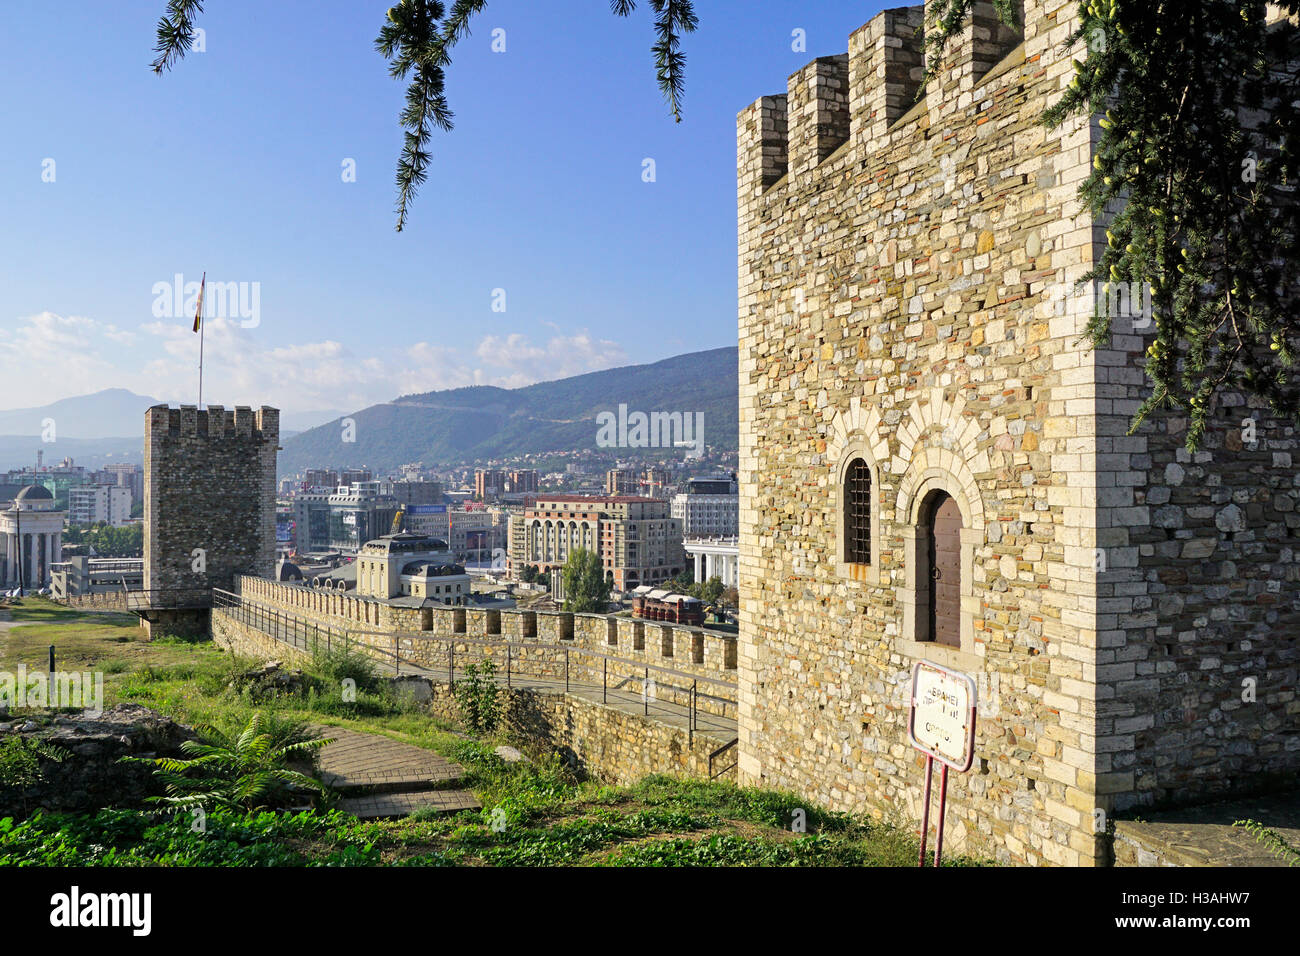 View of Macedonia's capital city, Skopje, with Skopje Fortress wall and watch towers. Stock Photo